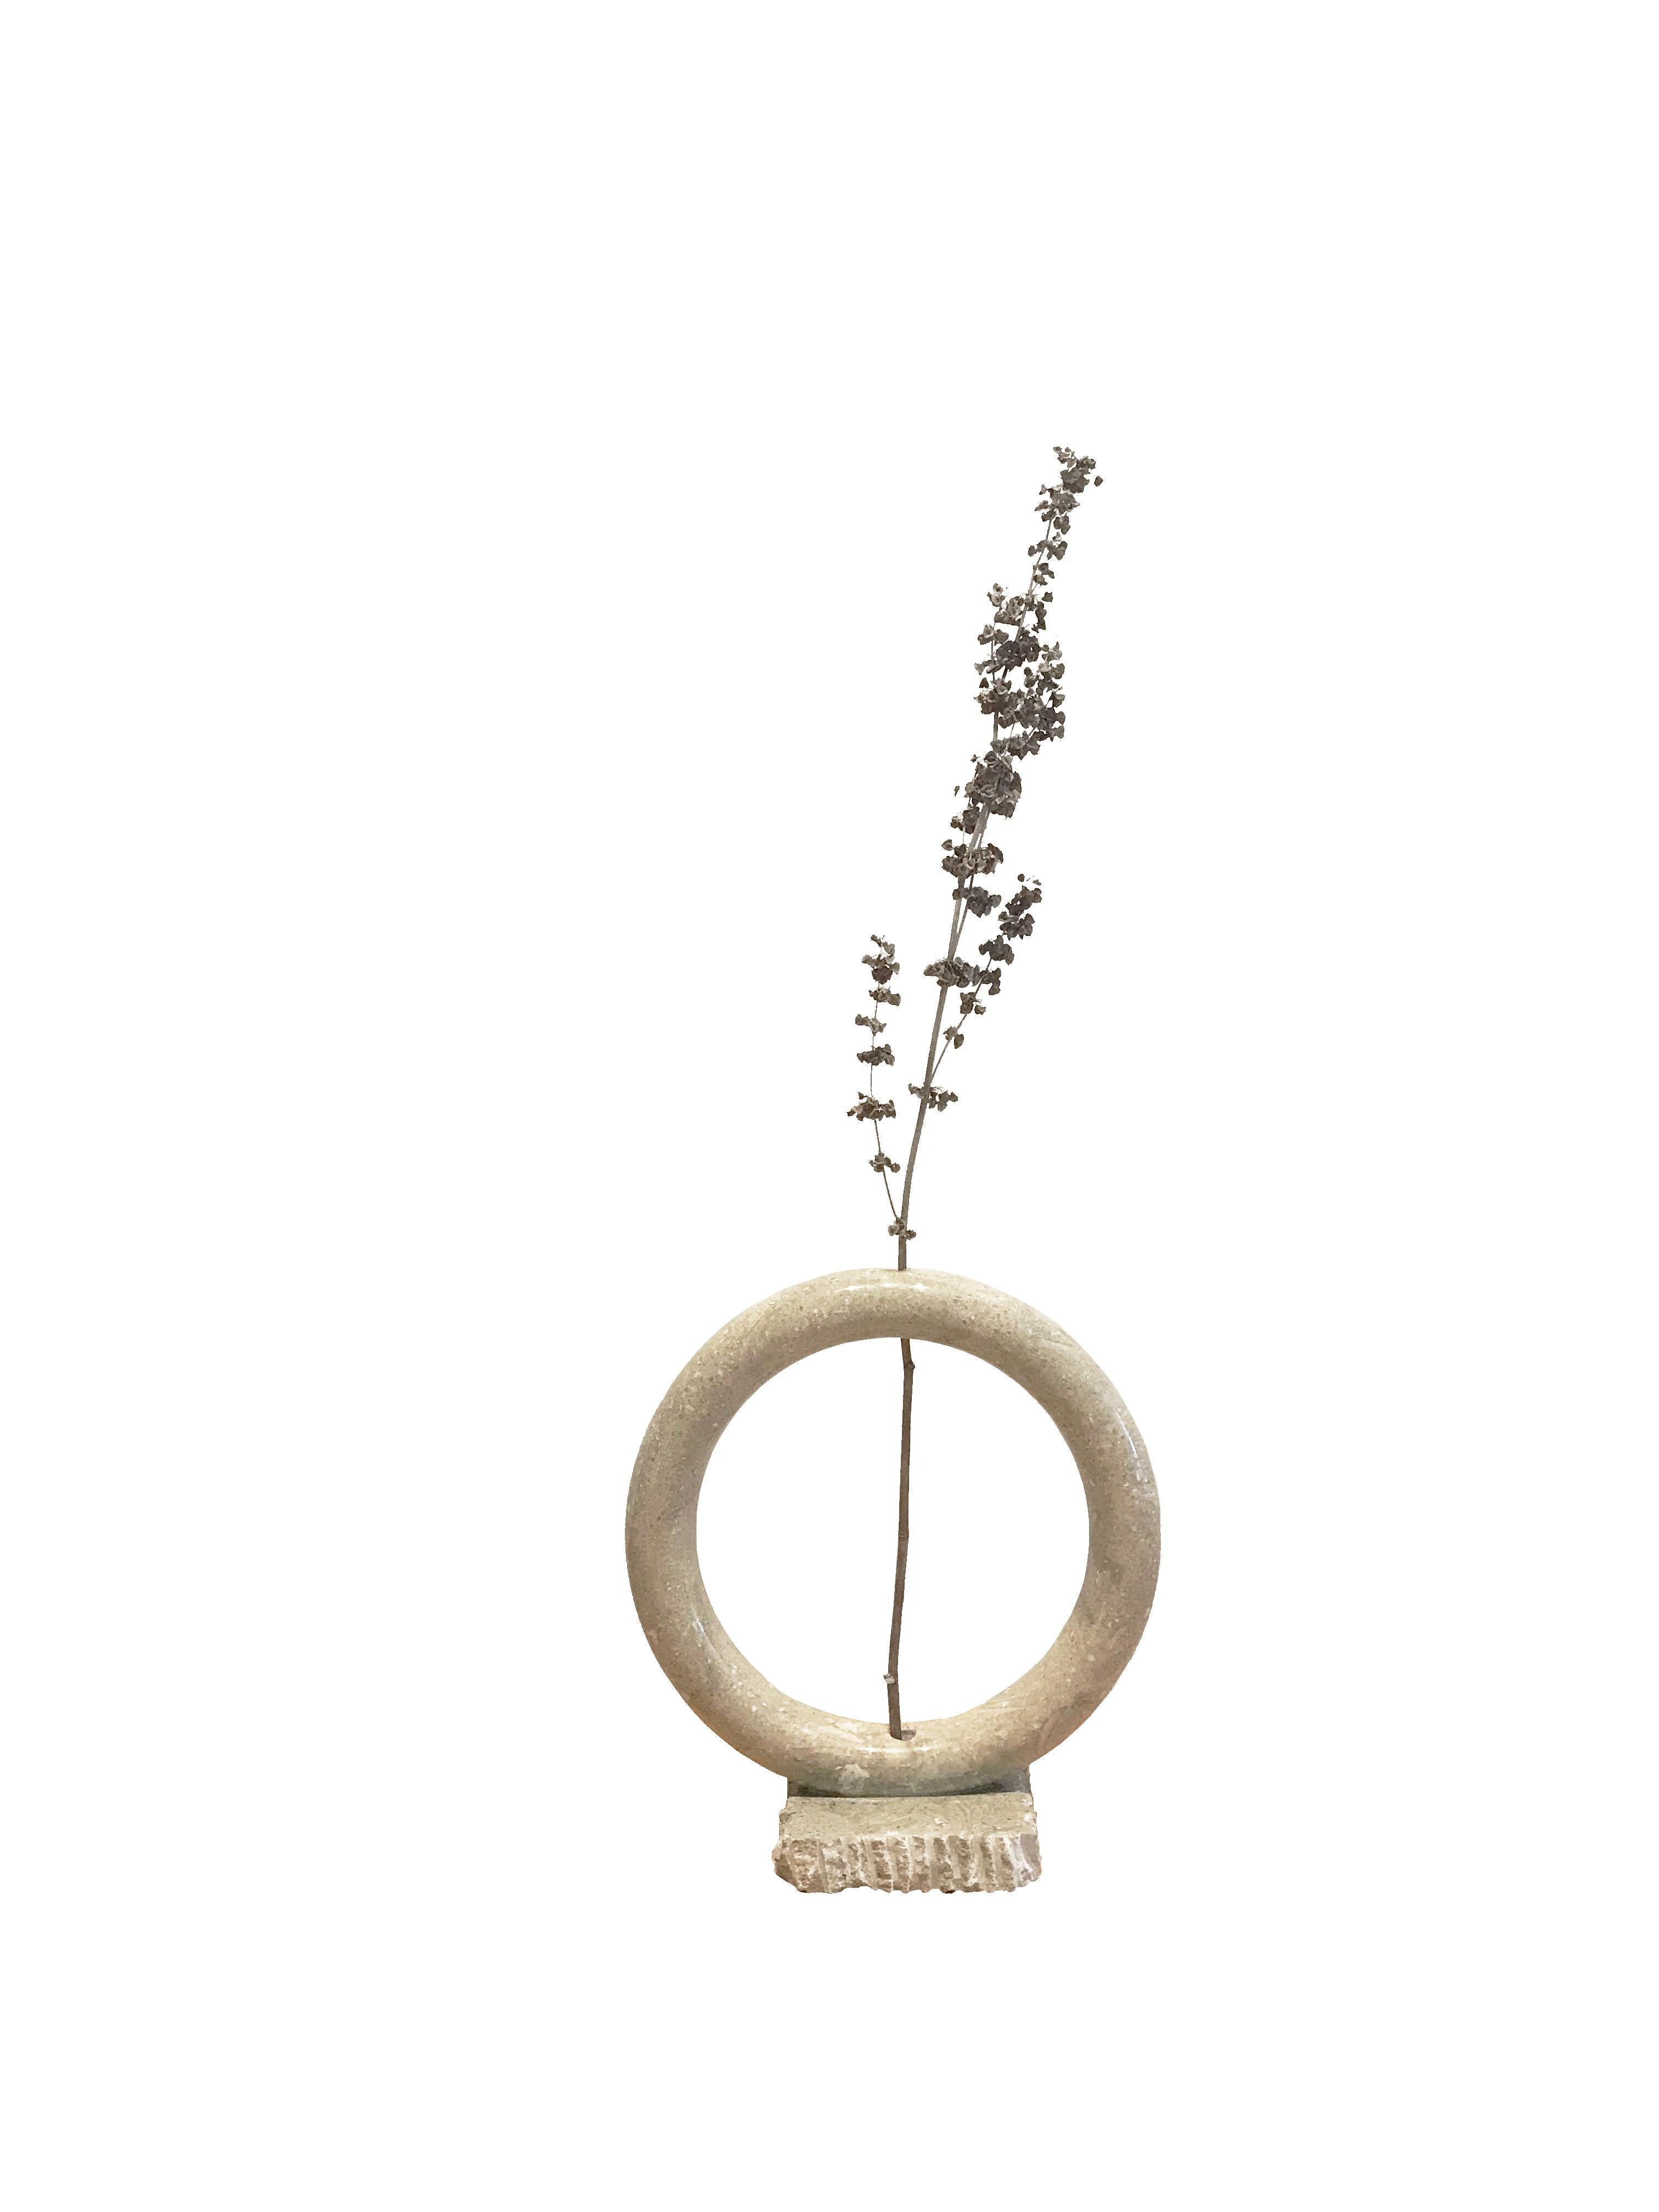 Mon vase by Studio Laf
Dimensions: W20 cm x H21 cm
Materials: Marble.


Mon Vase emerged with the IDEA of reuniting natural stone with nature after shaping it by hand. It emphasizes the concept of balance and the wabi-sabi approach with its